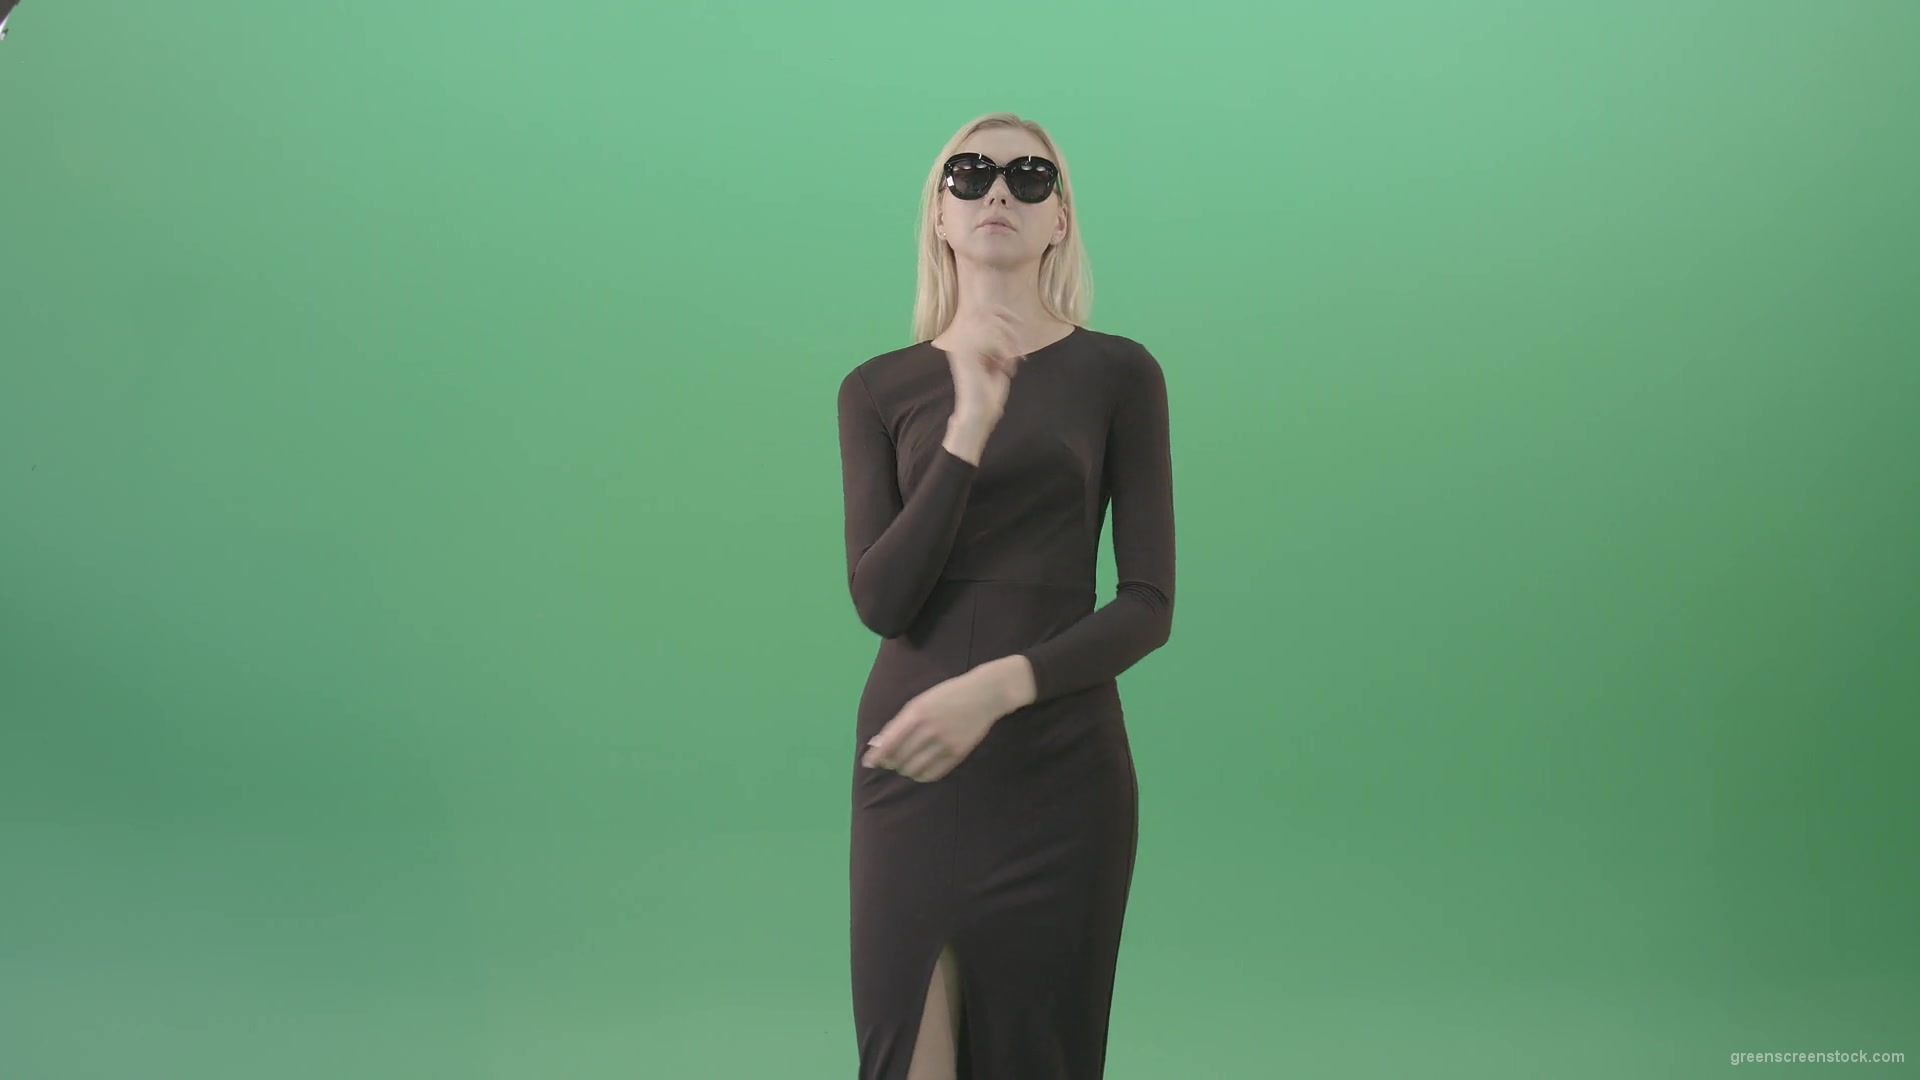 Elegant-woman-in-black-suite-searching-a-virtual-products-on-touch-screen-in-green-screen-studio-4K-Video-Footage-1920_008 Green Screen Stock